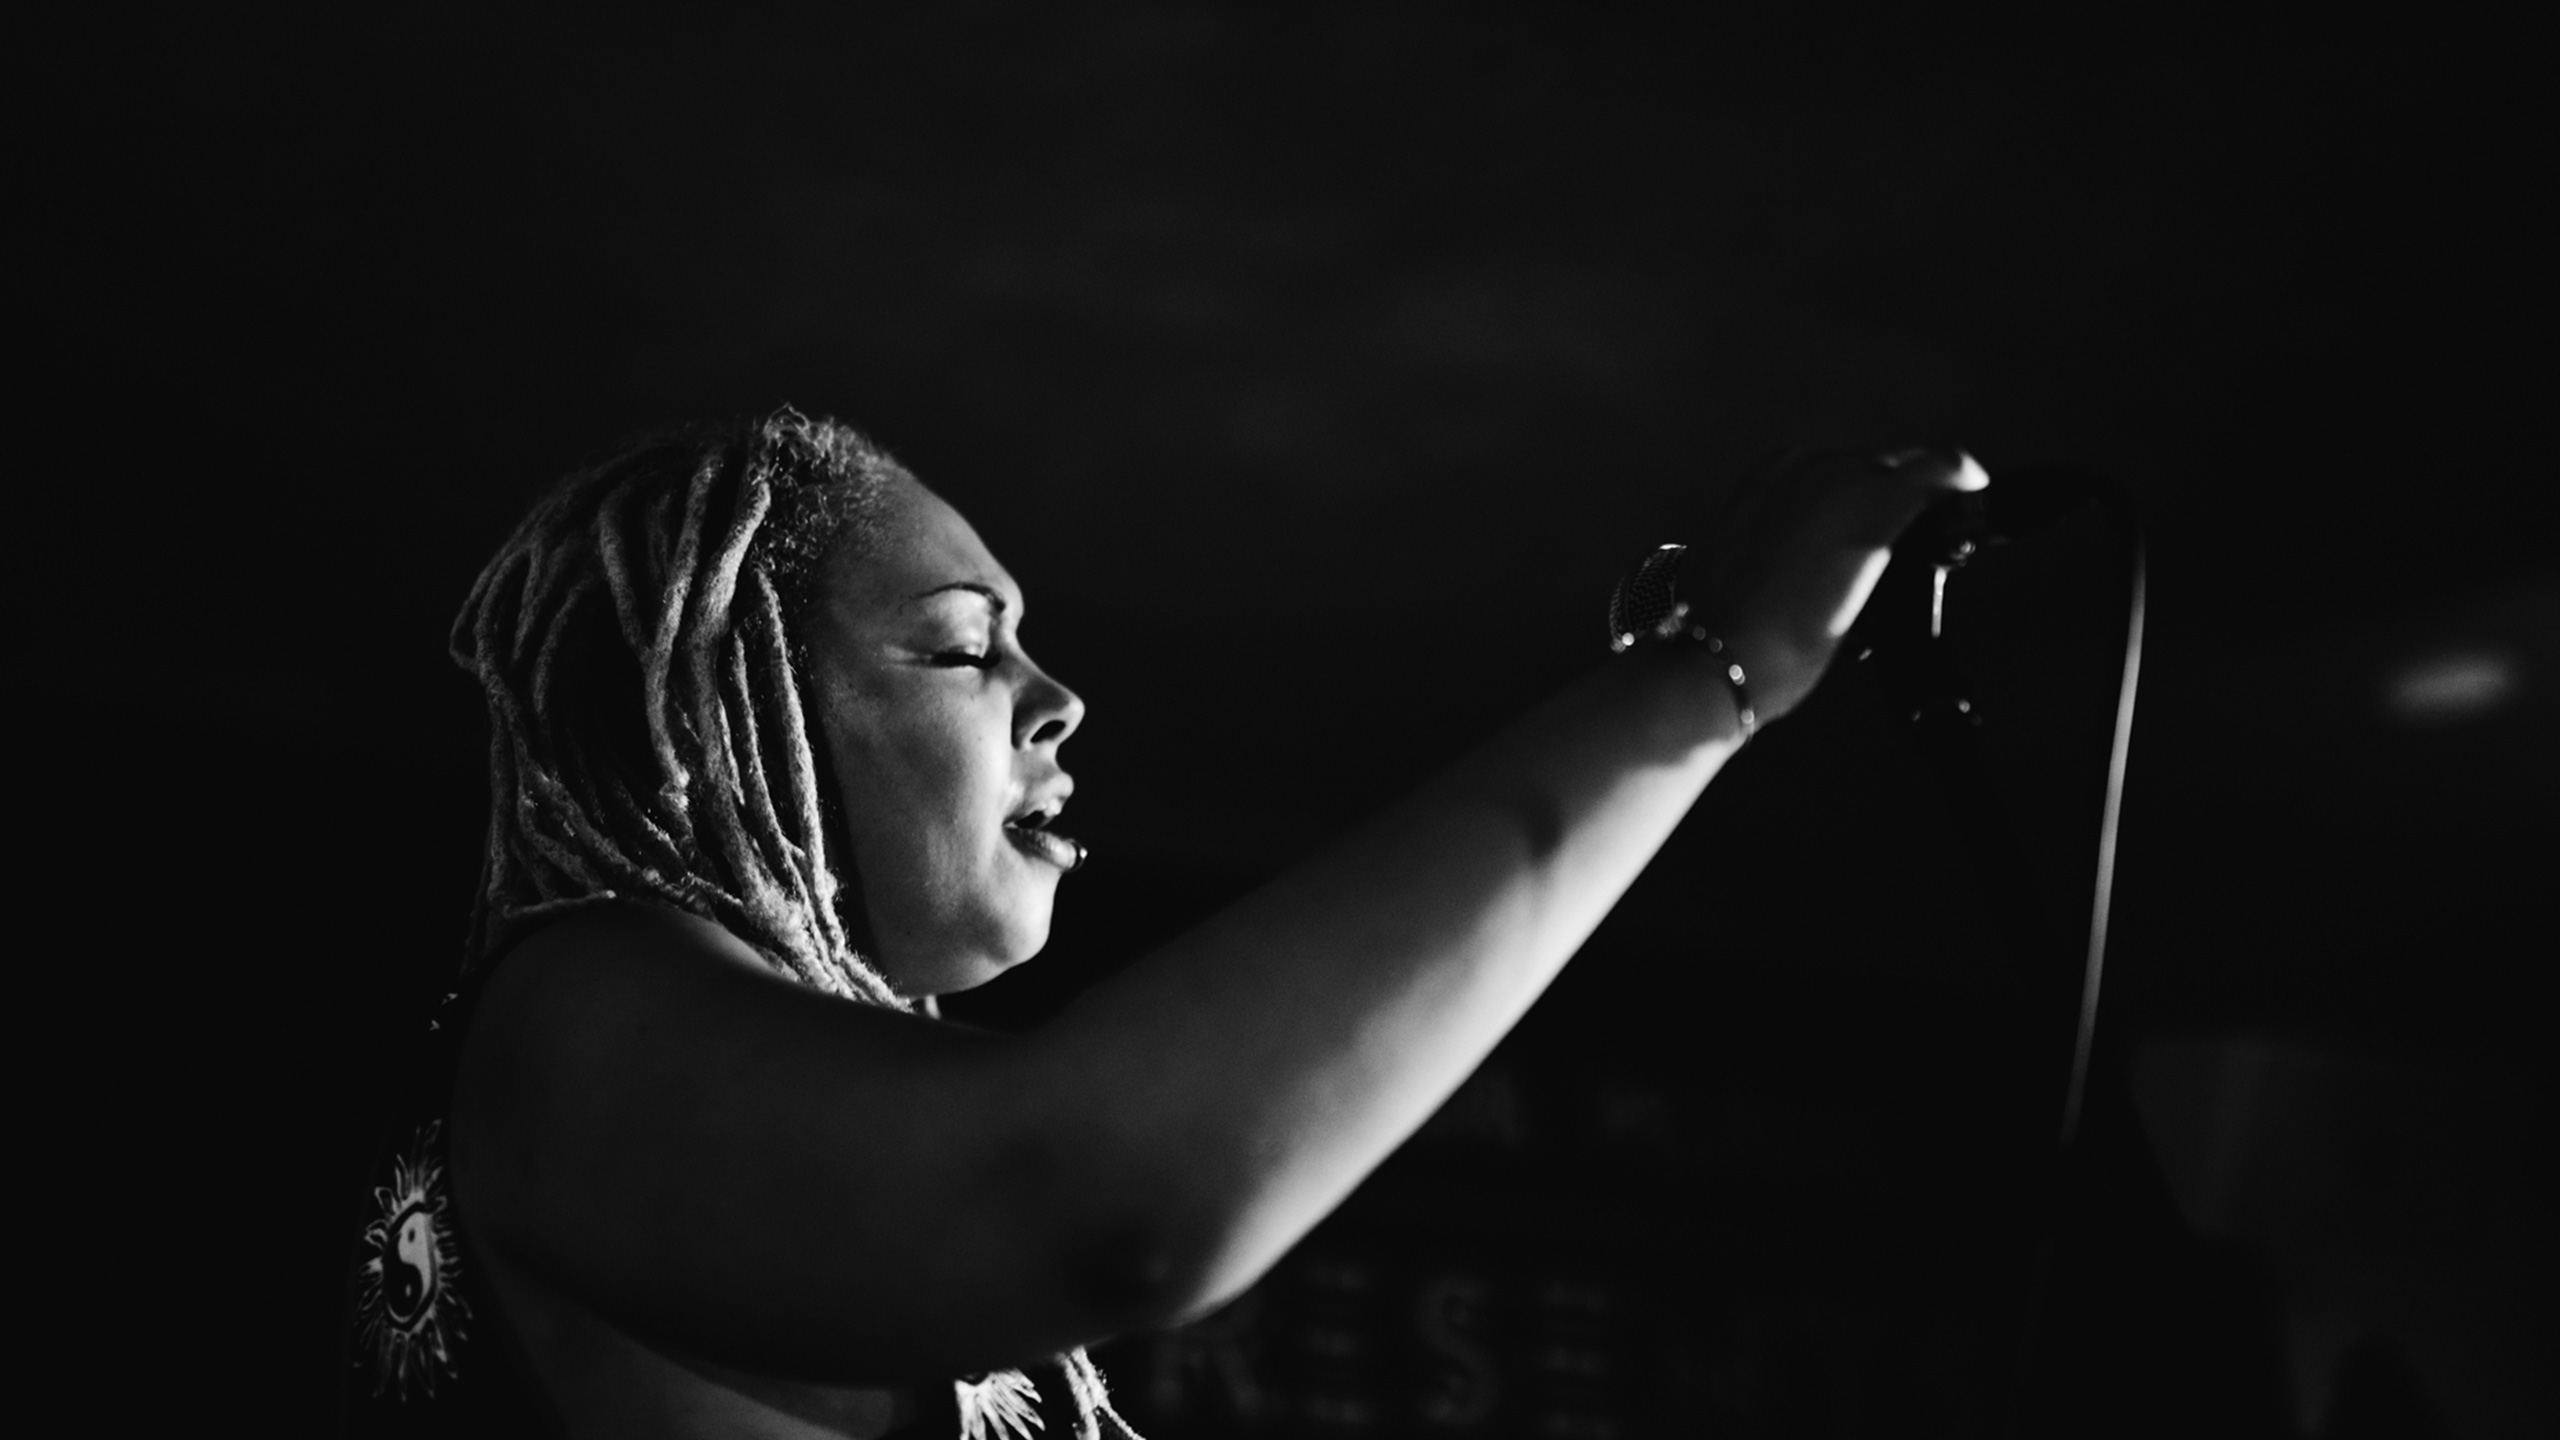 Harleighblu raises the microphone at PRS for Music Presents